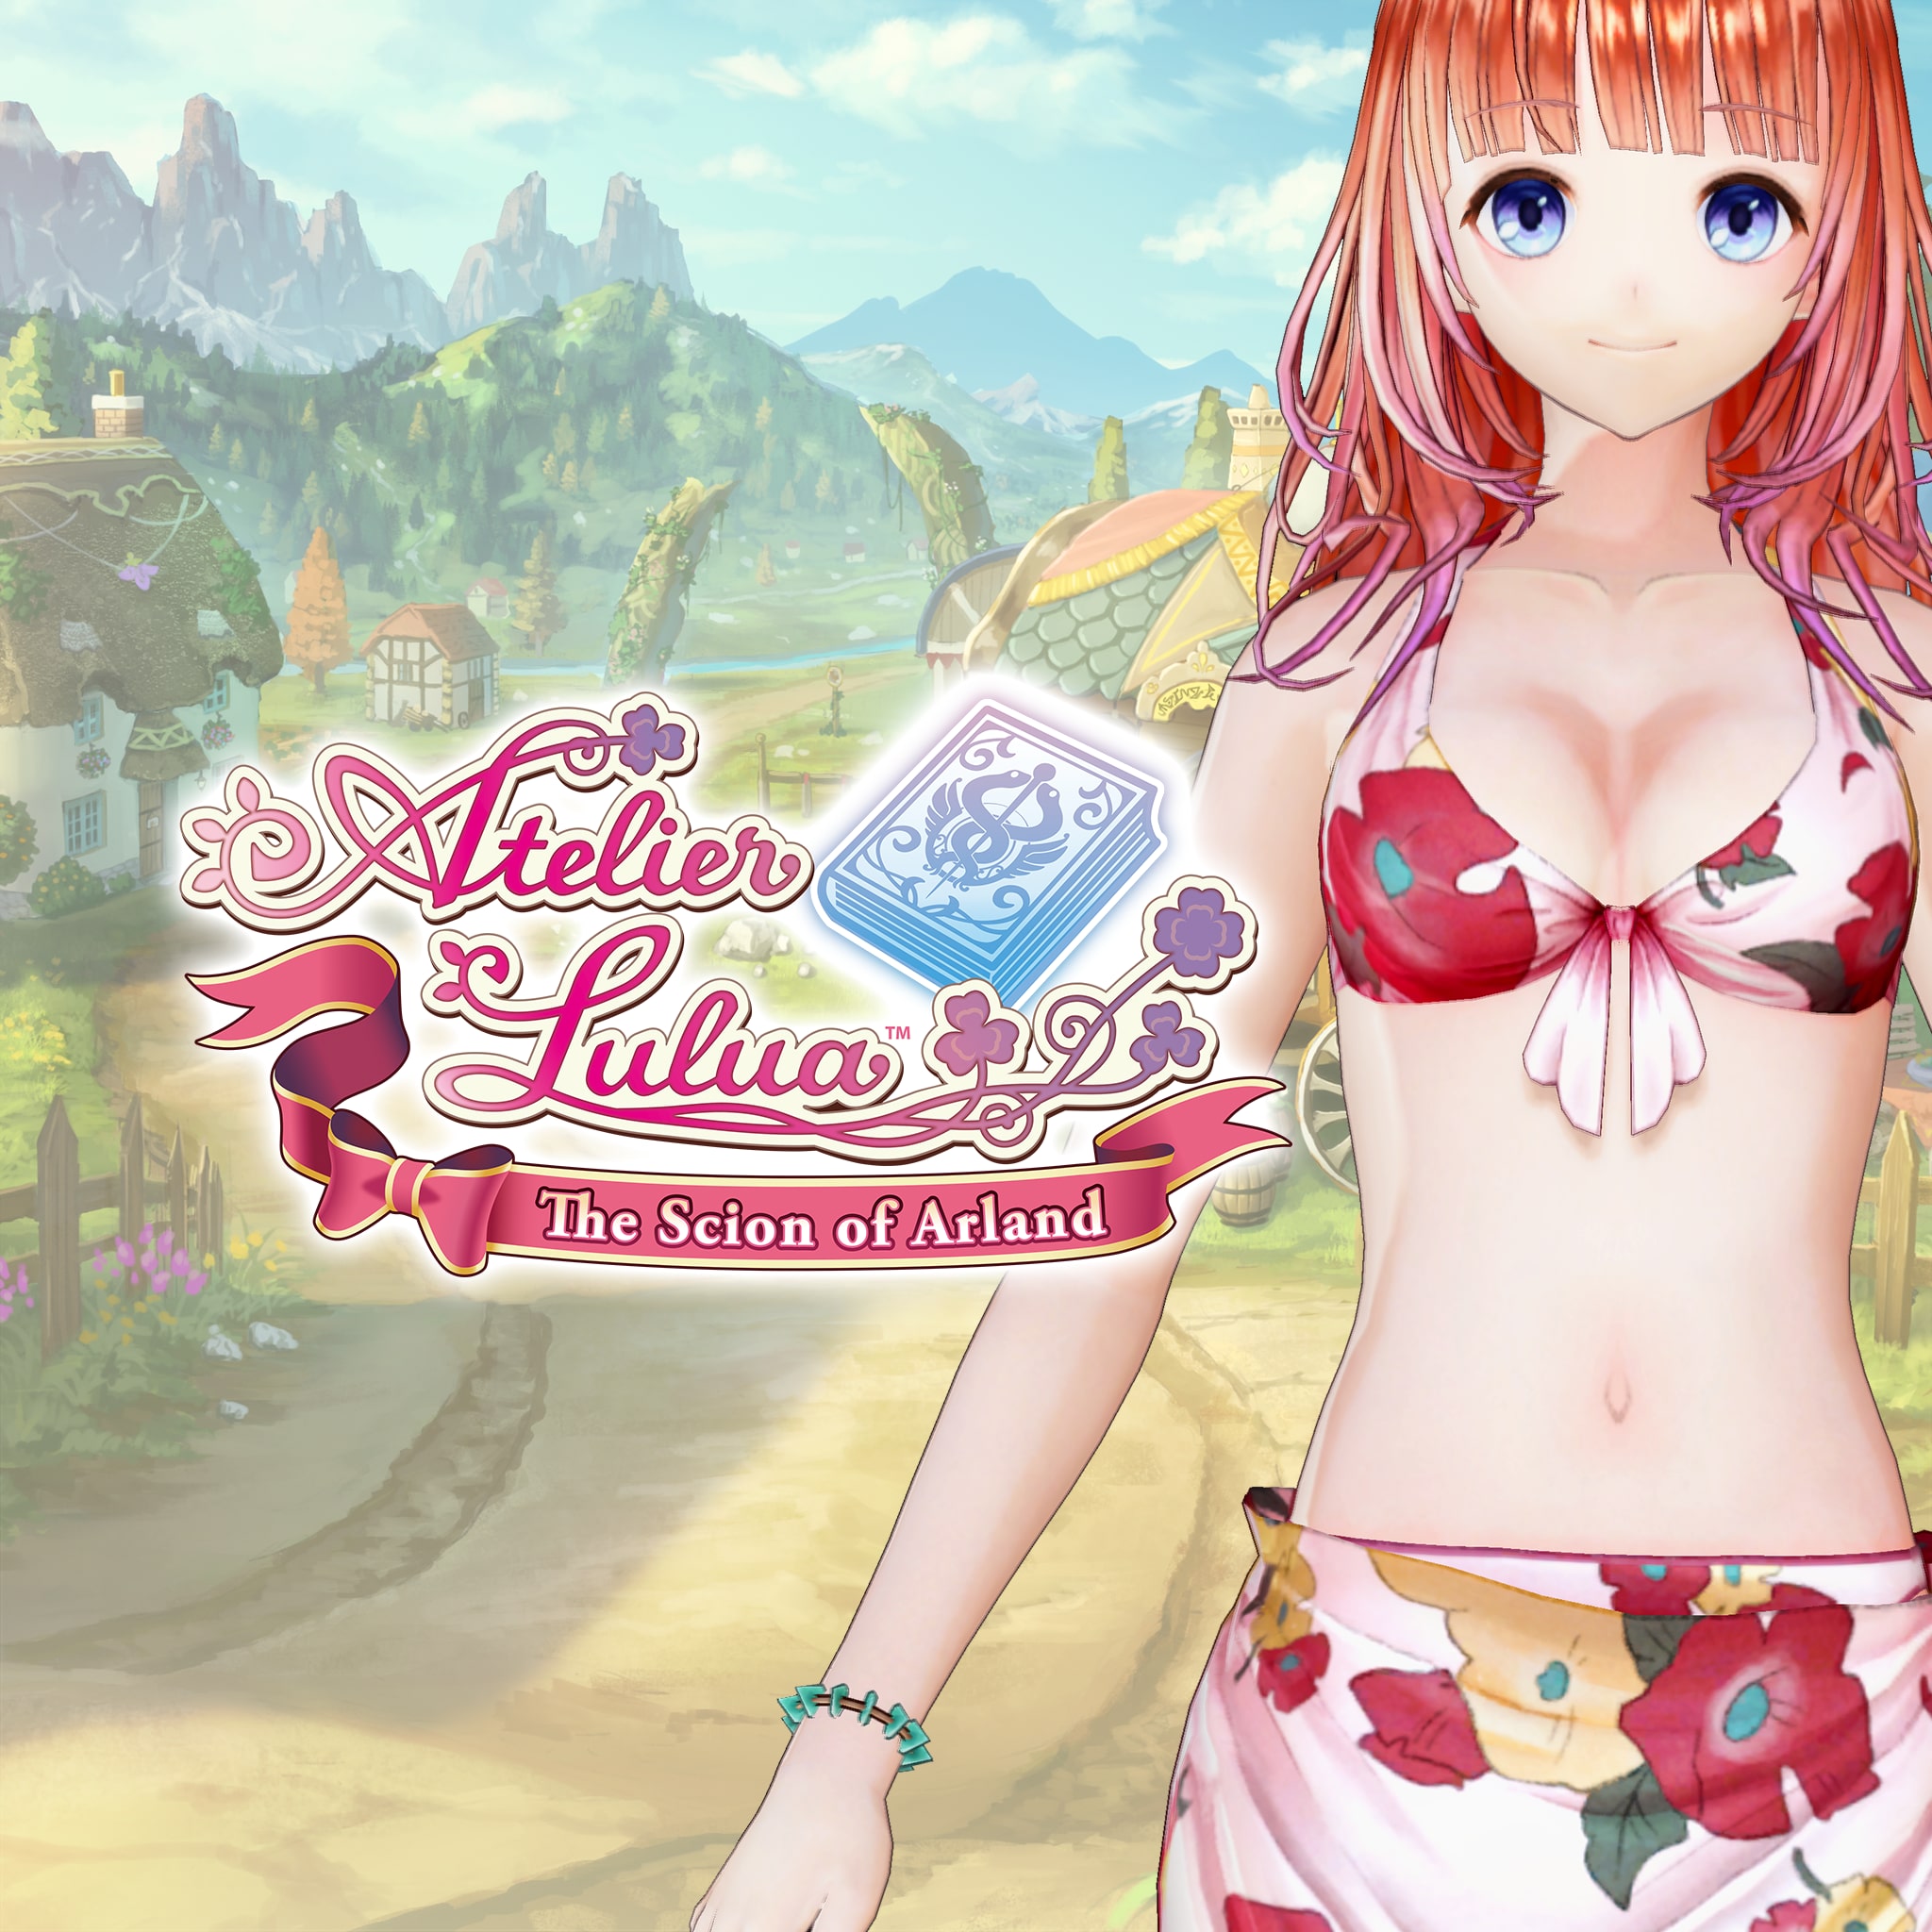 Rorona's Swimsuit 'Floral Pareo'